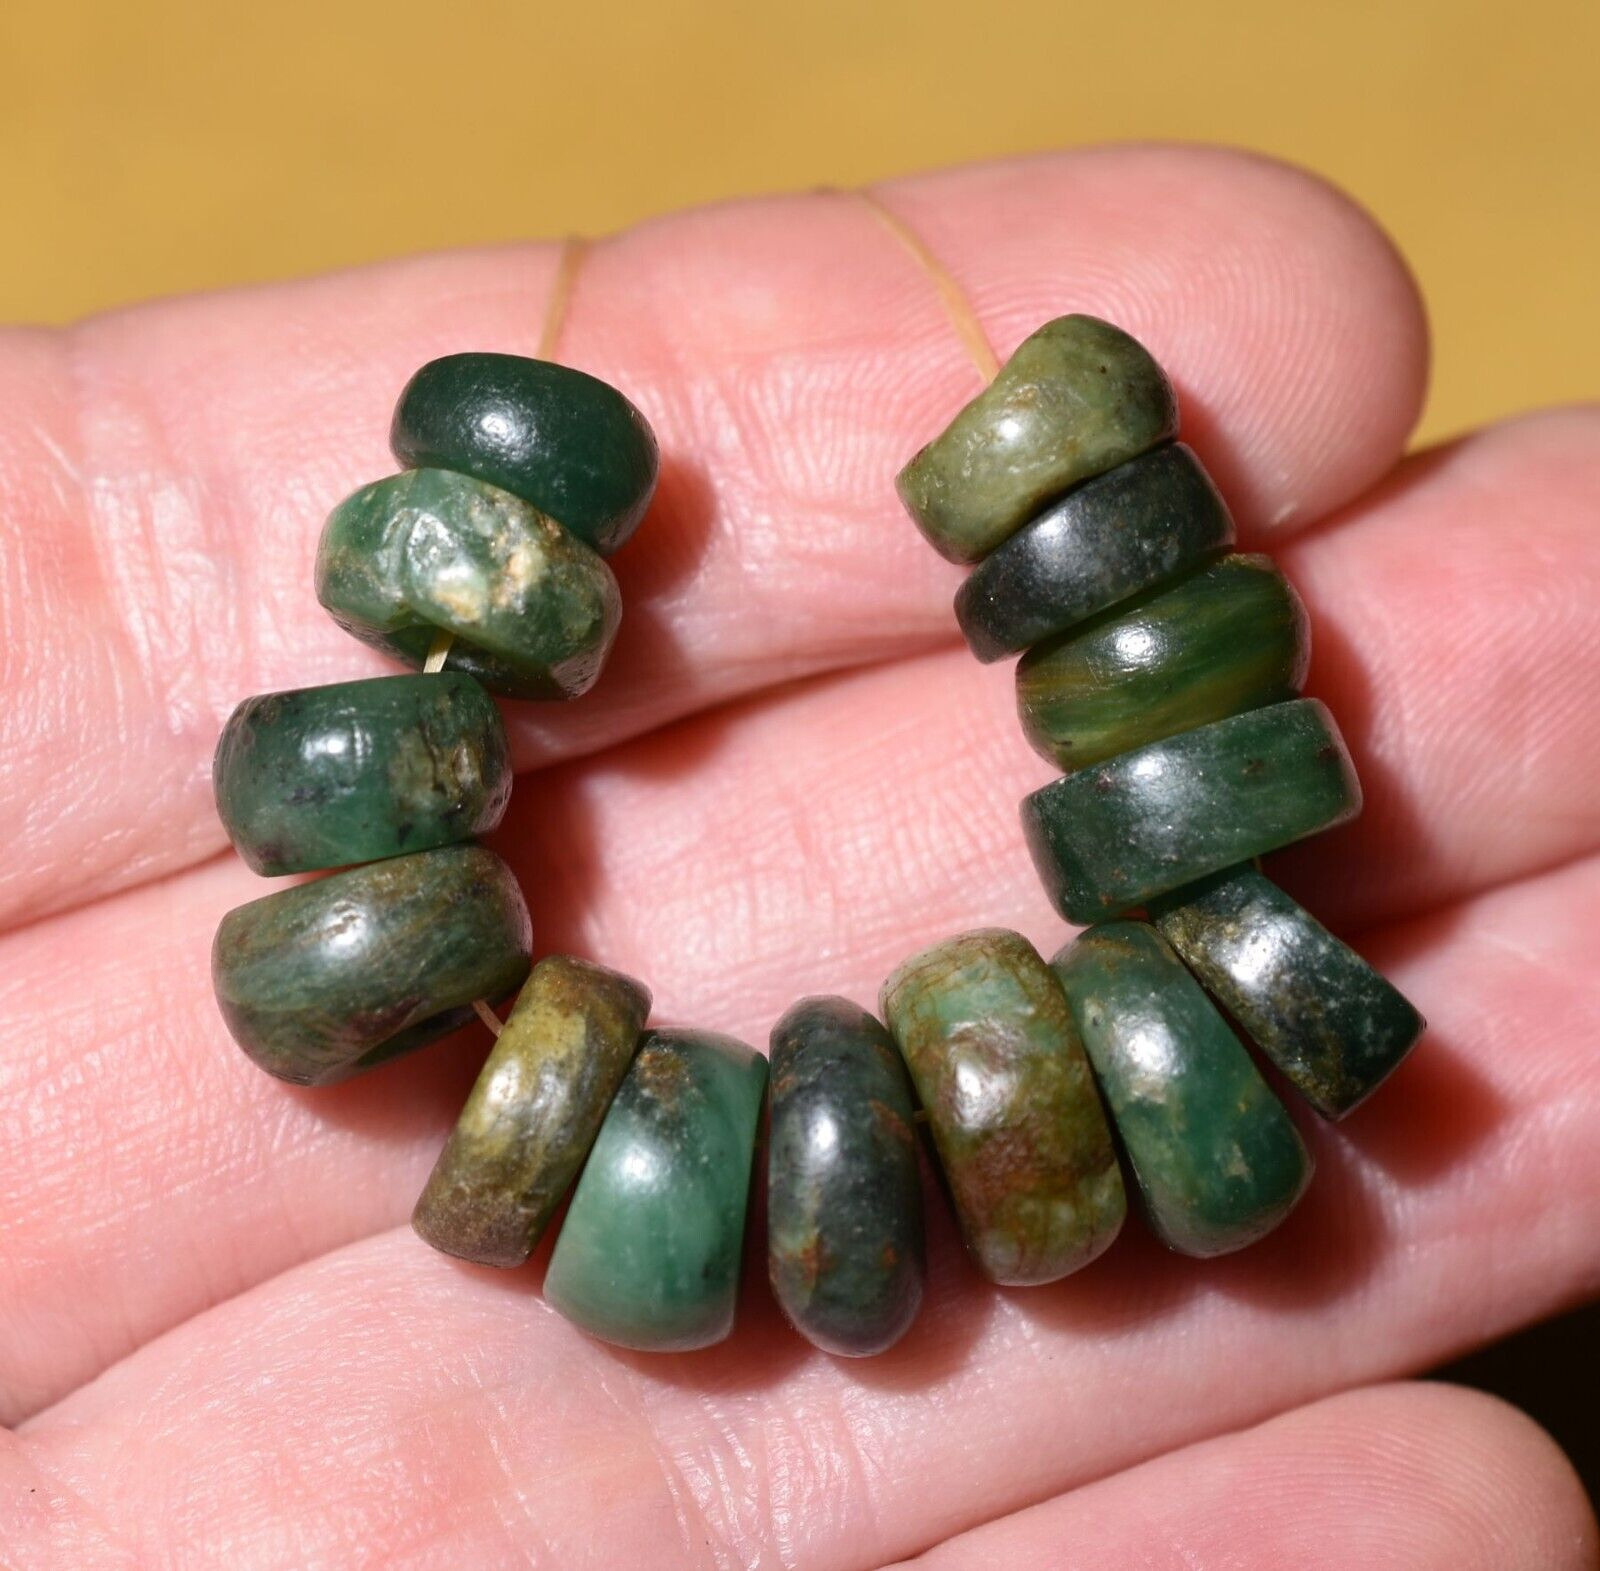 Ancient Excavated Gemmy Serpentine Stone Beads Found Mauritania, African Trade